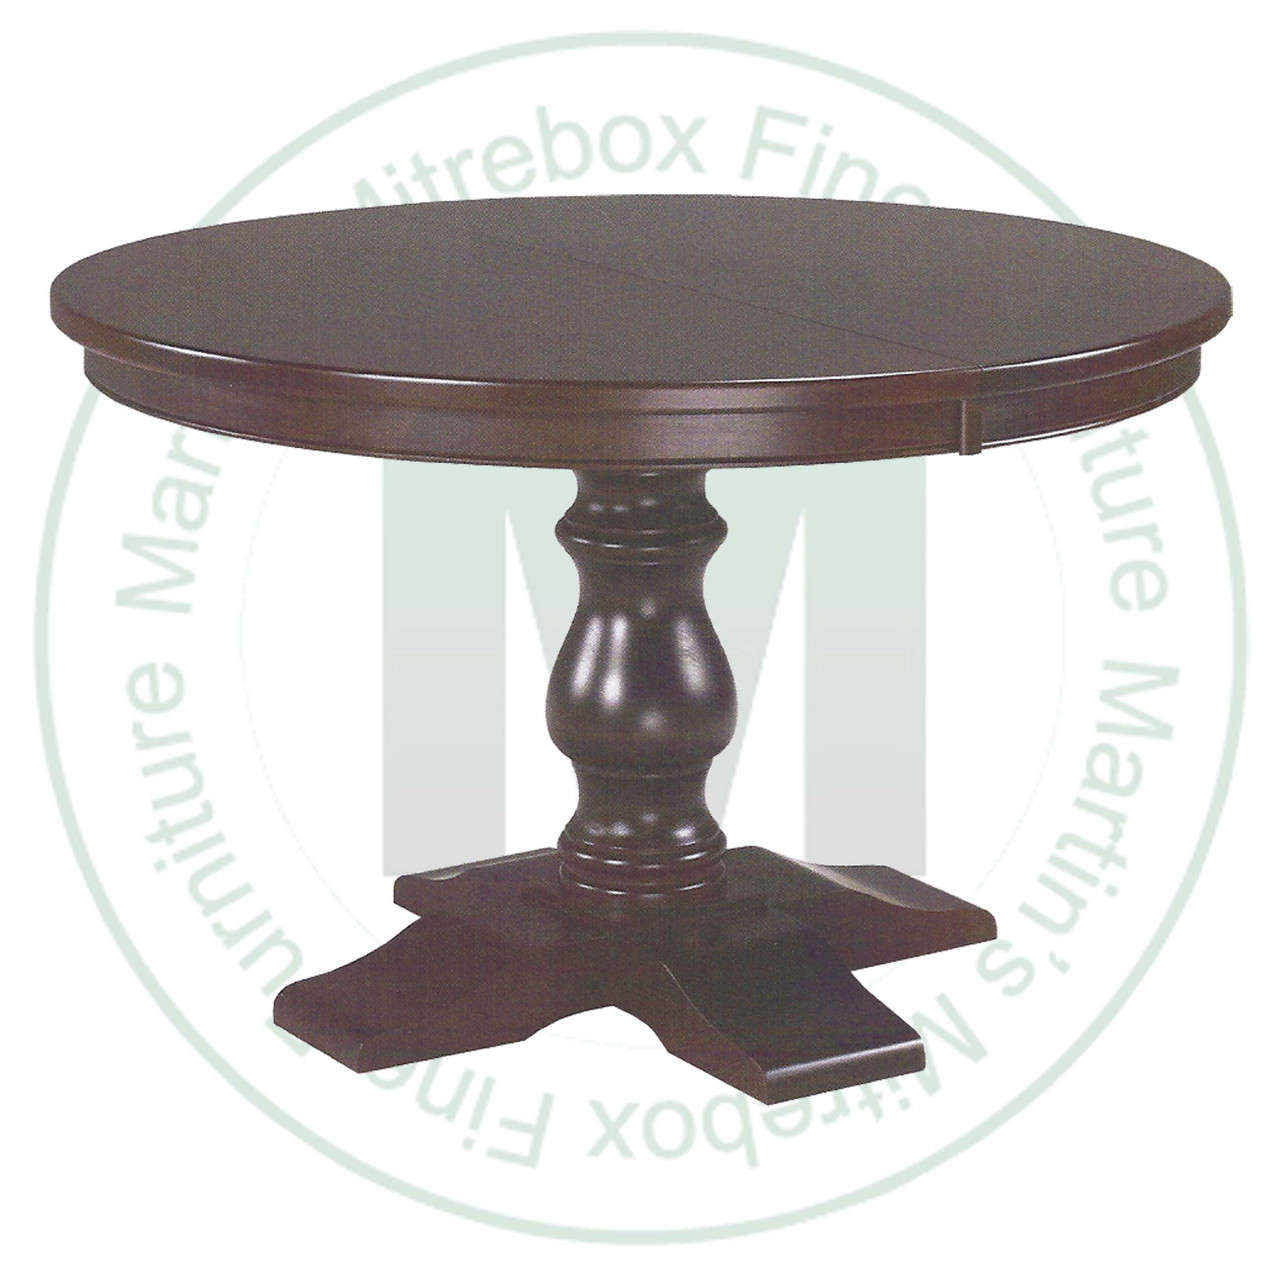 Maple Savannah Single Pedestal Table 42''D x 42''W x 30''H With 2 - 12'' Leaves Table